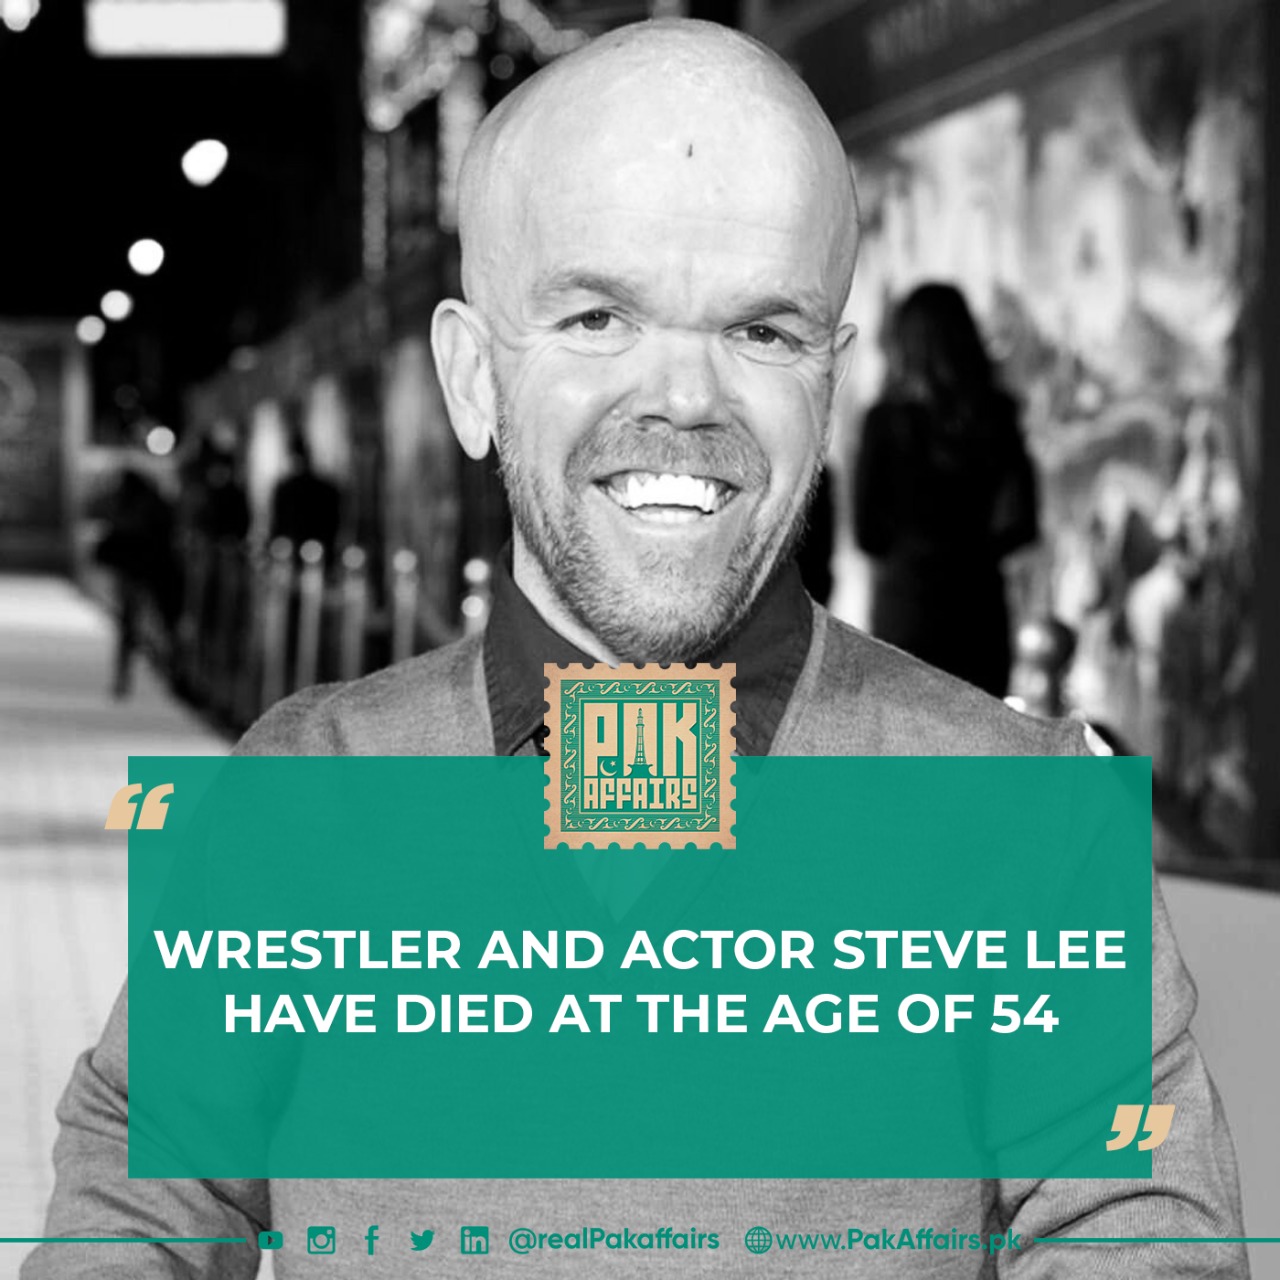 Wrestler and actor Steve Lee have died at the age of 54.